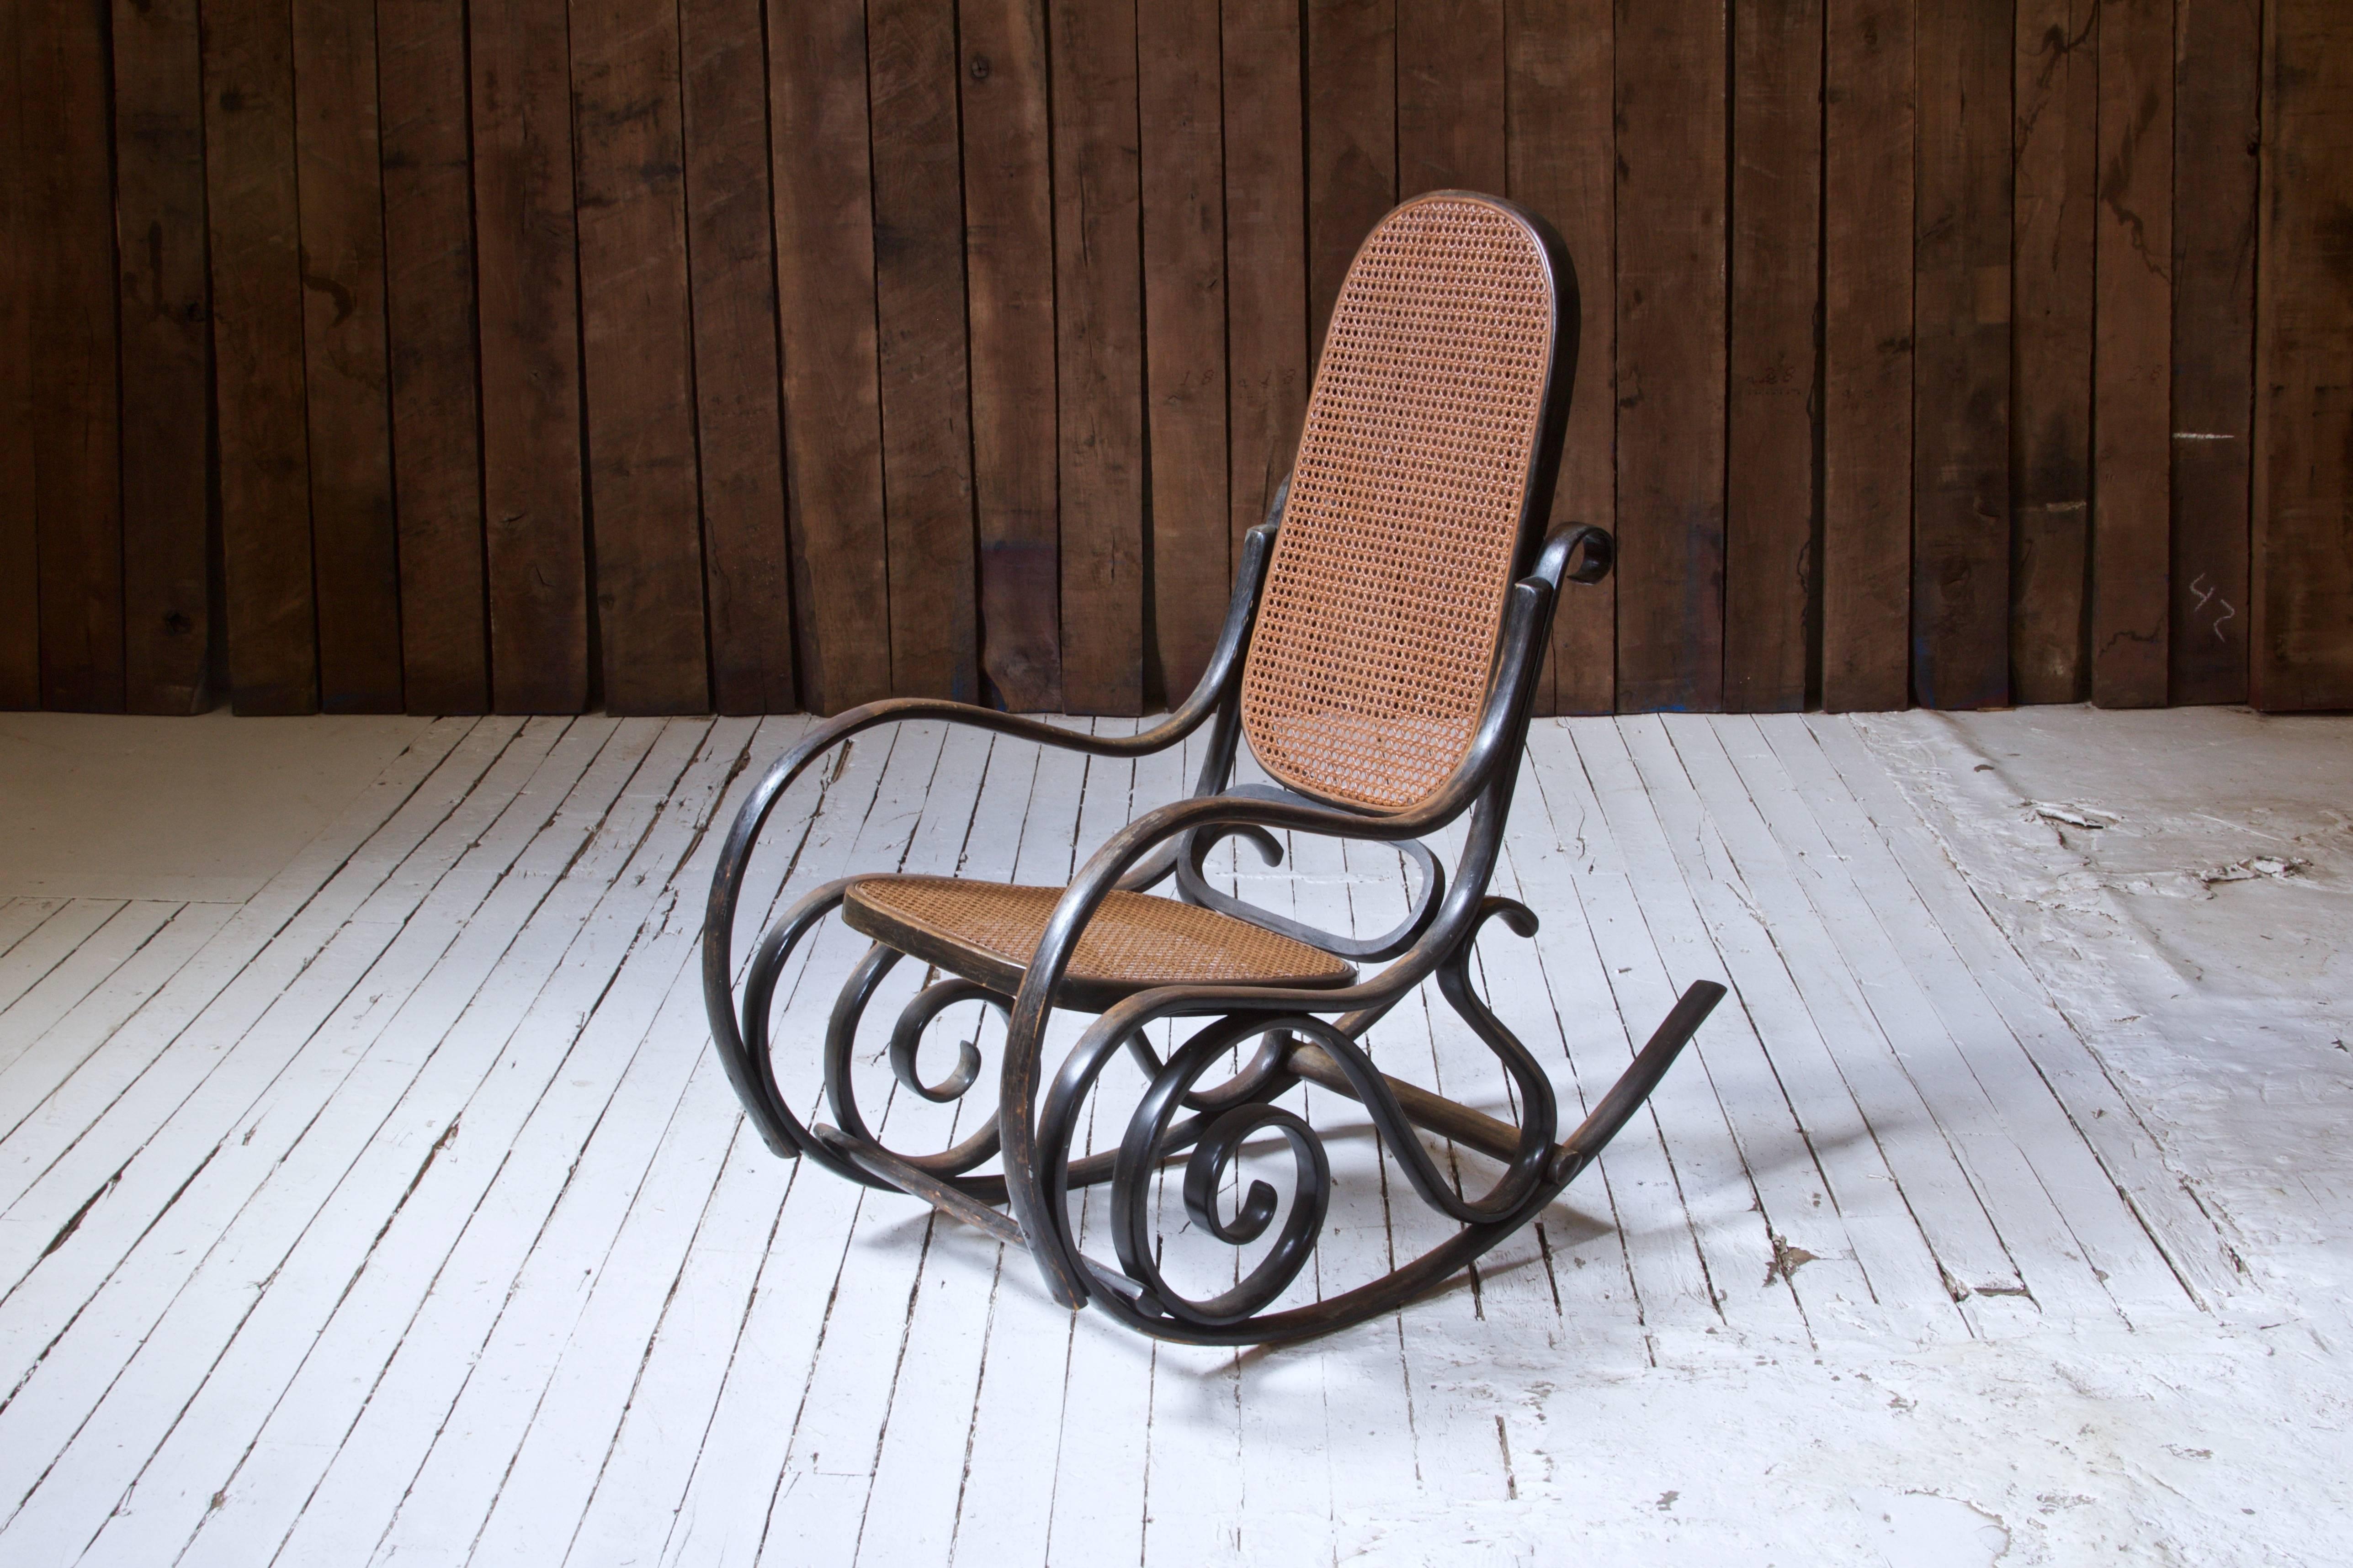 This design, the Thonet Model #10, is an iconic curvilinear rocking chair first conceived by the prolific Michael Thonet in the mid/late 19th century. Thonet efficiently outsourced production of many of his designs throughout the 19th and 20th